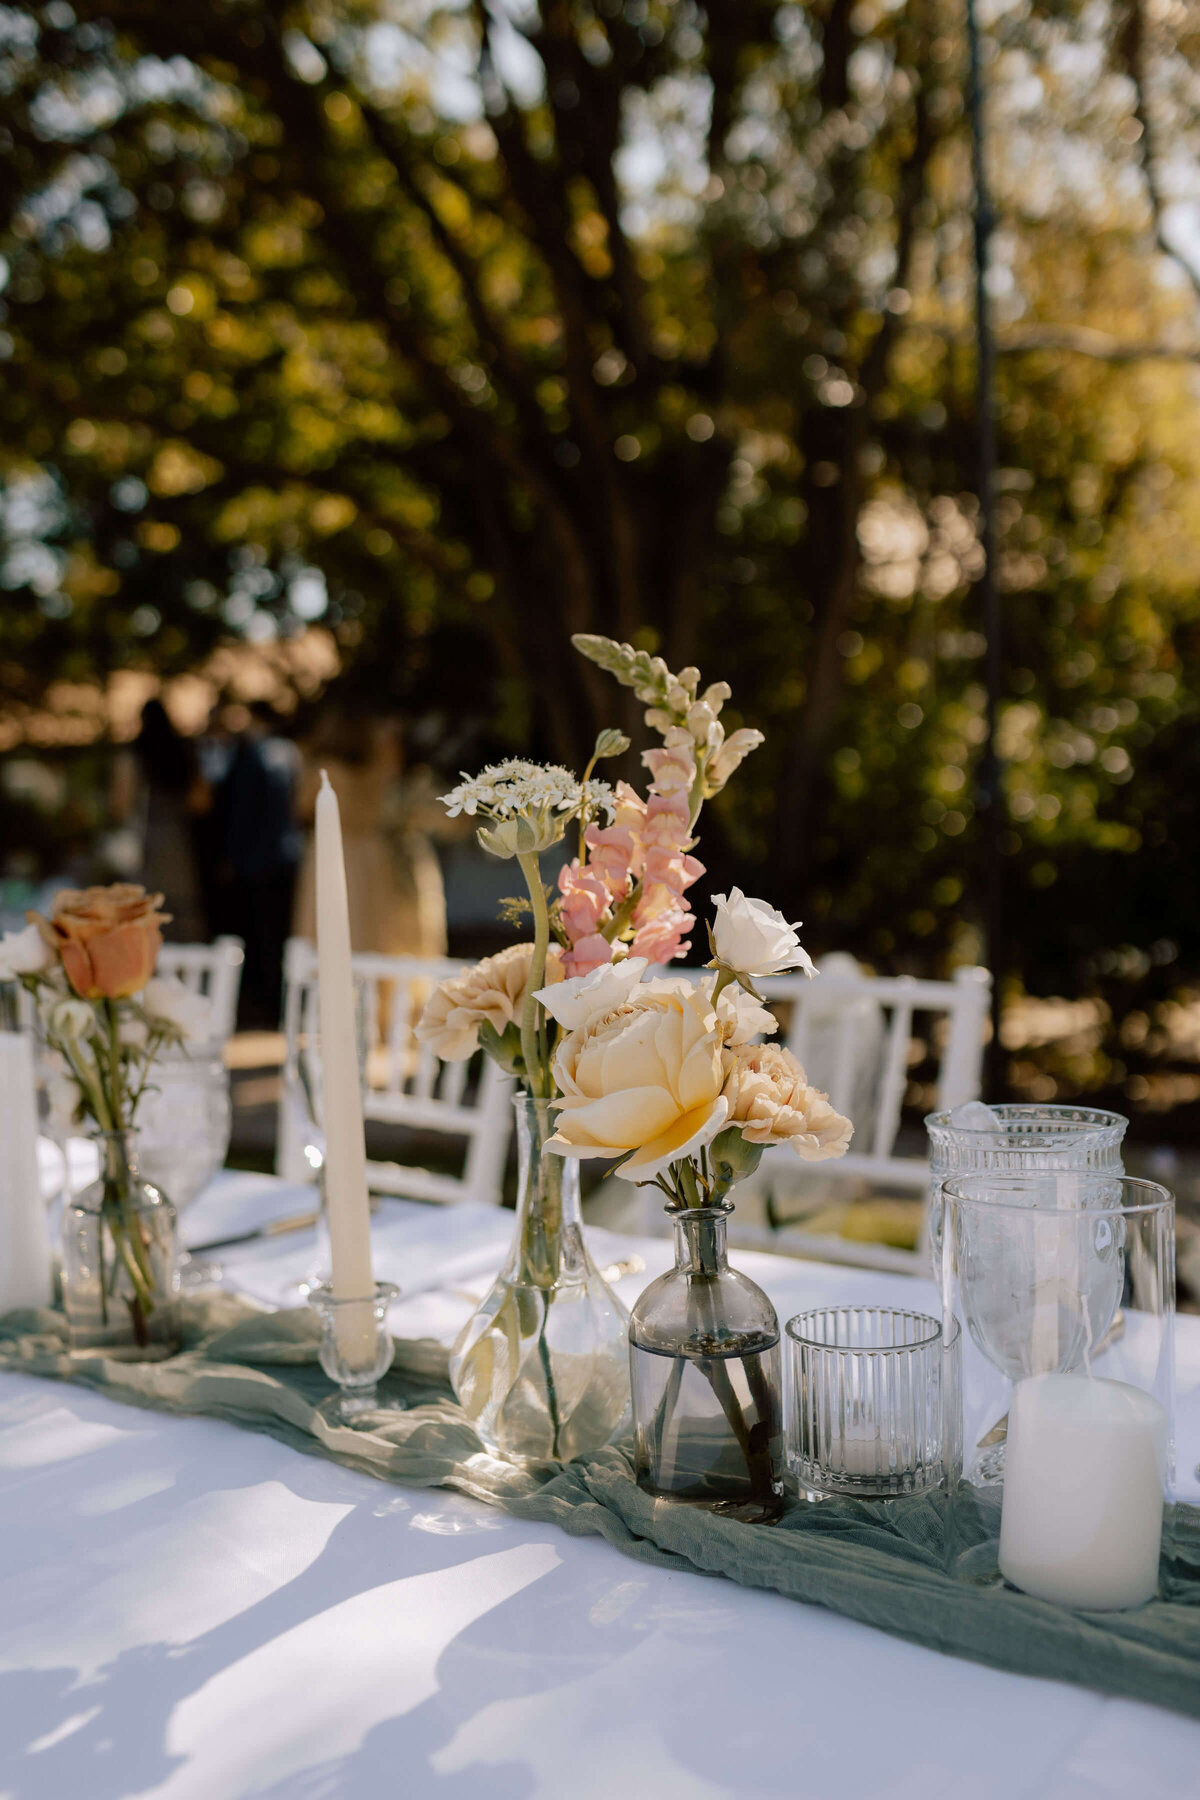 Catholic wedding tablescape with flowers in vases and tall candles